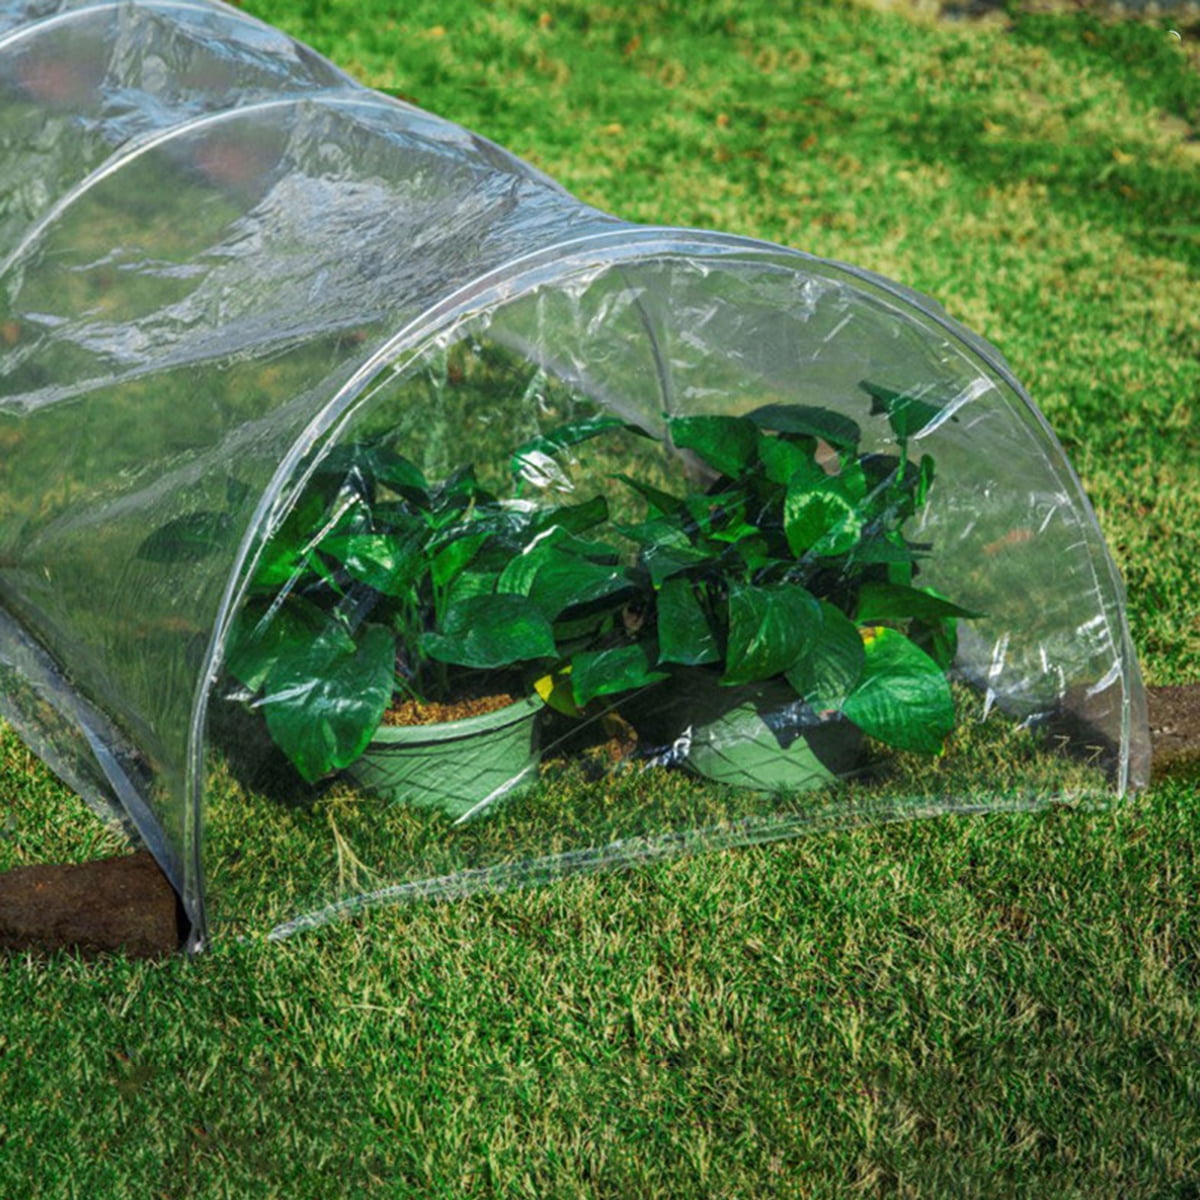 Agfabric 2.4Mil Plastic Covering Clear Polyethylene Greenhouse Film UV Resistant for Grow Tunnel and Garden Hoop Plant Cover&Frost Blanket for Season Extension,Keep Warm and Frost Protection 6.5x10ft 